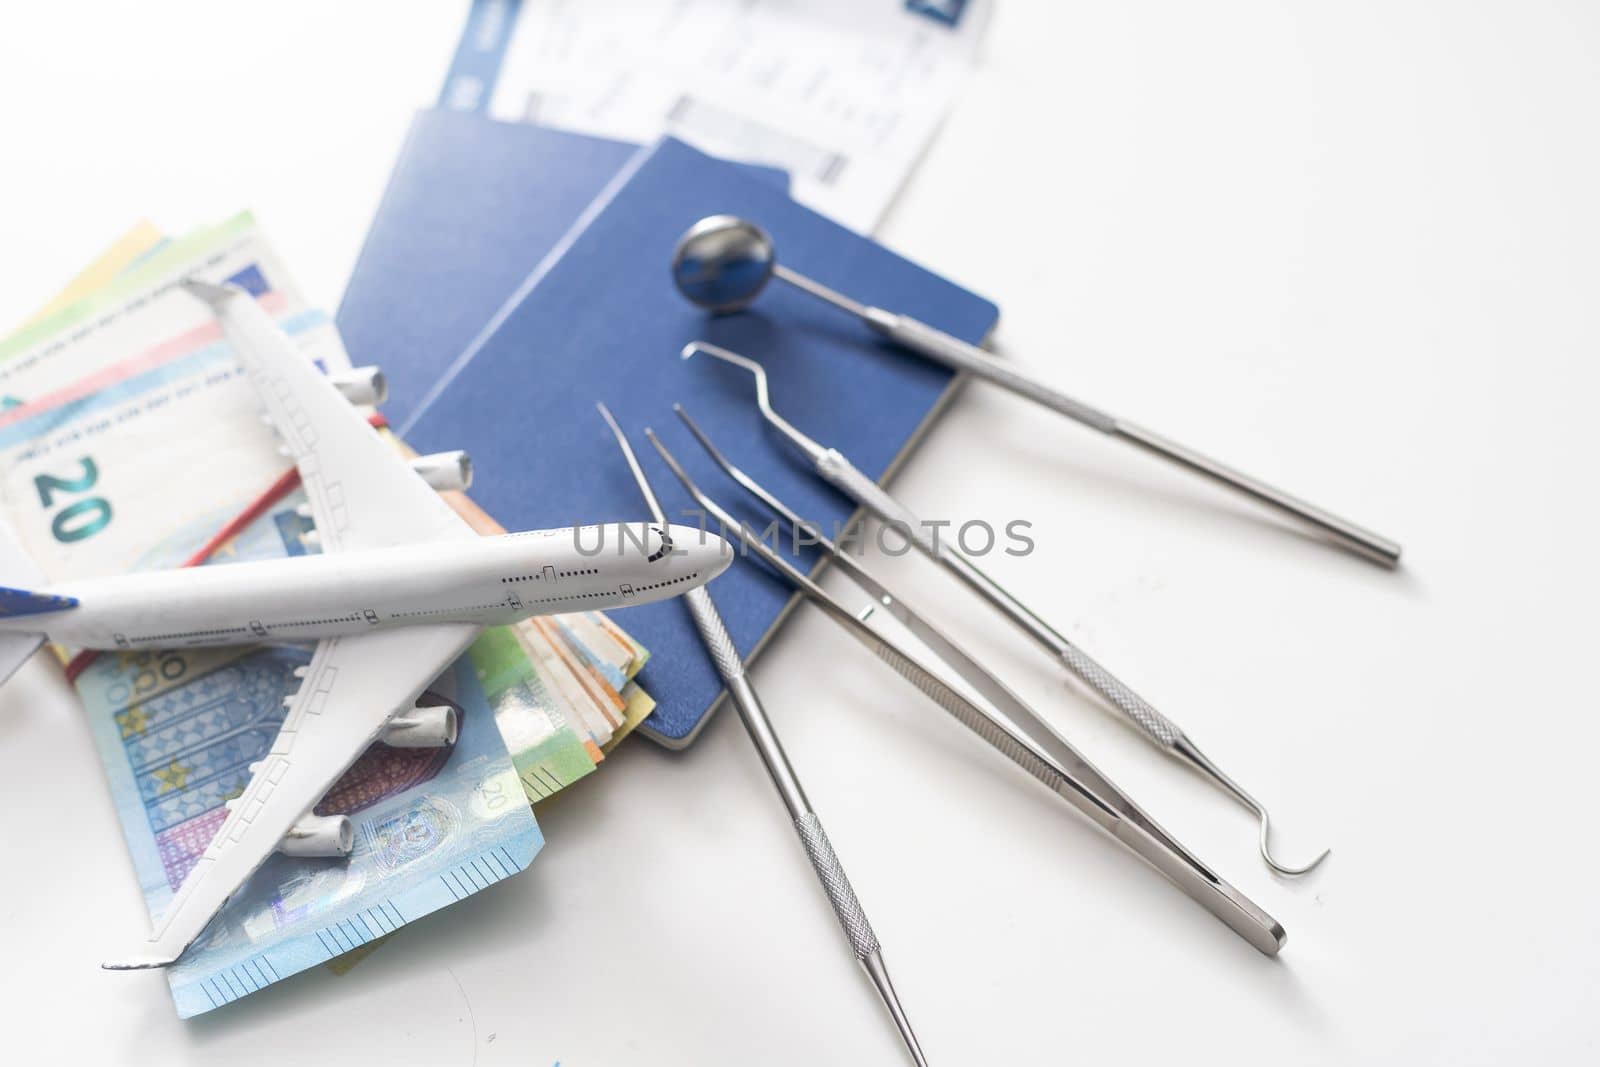 An Overhead View Of Dental Tools On Euro Notes, passport toy, airplane.